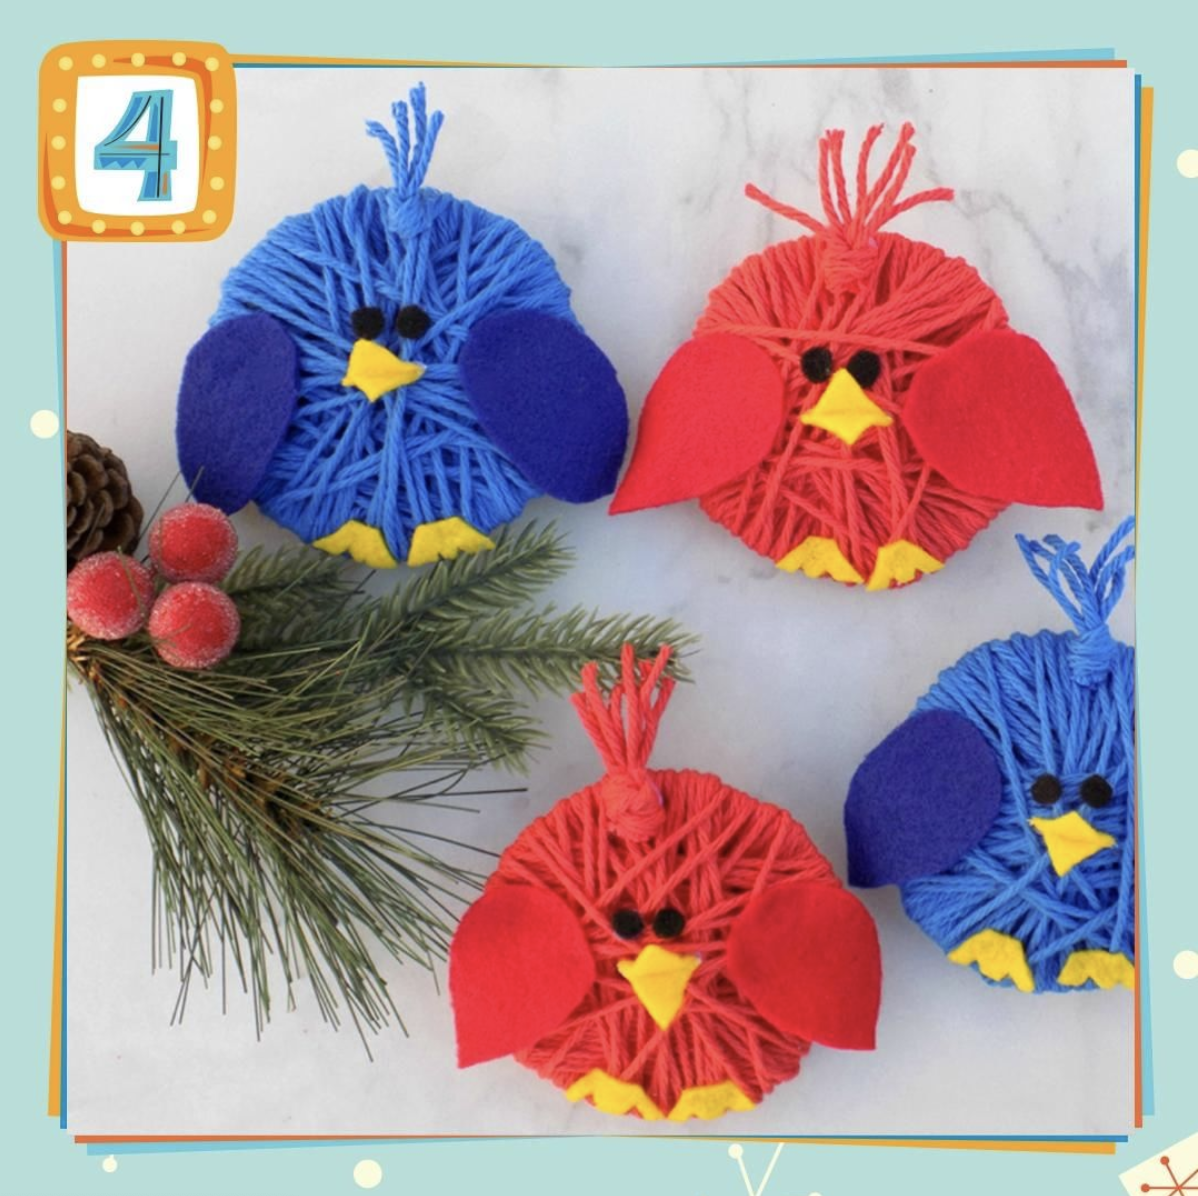 🎵On the 4th day of Christmas 🎵…we called up @onesavvymom to #DIY the CPI. In 2018, four calling birds would cost $599.96, but these Yarn Ornaments are the perfect way to get your tree chirping.